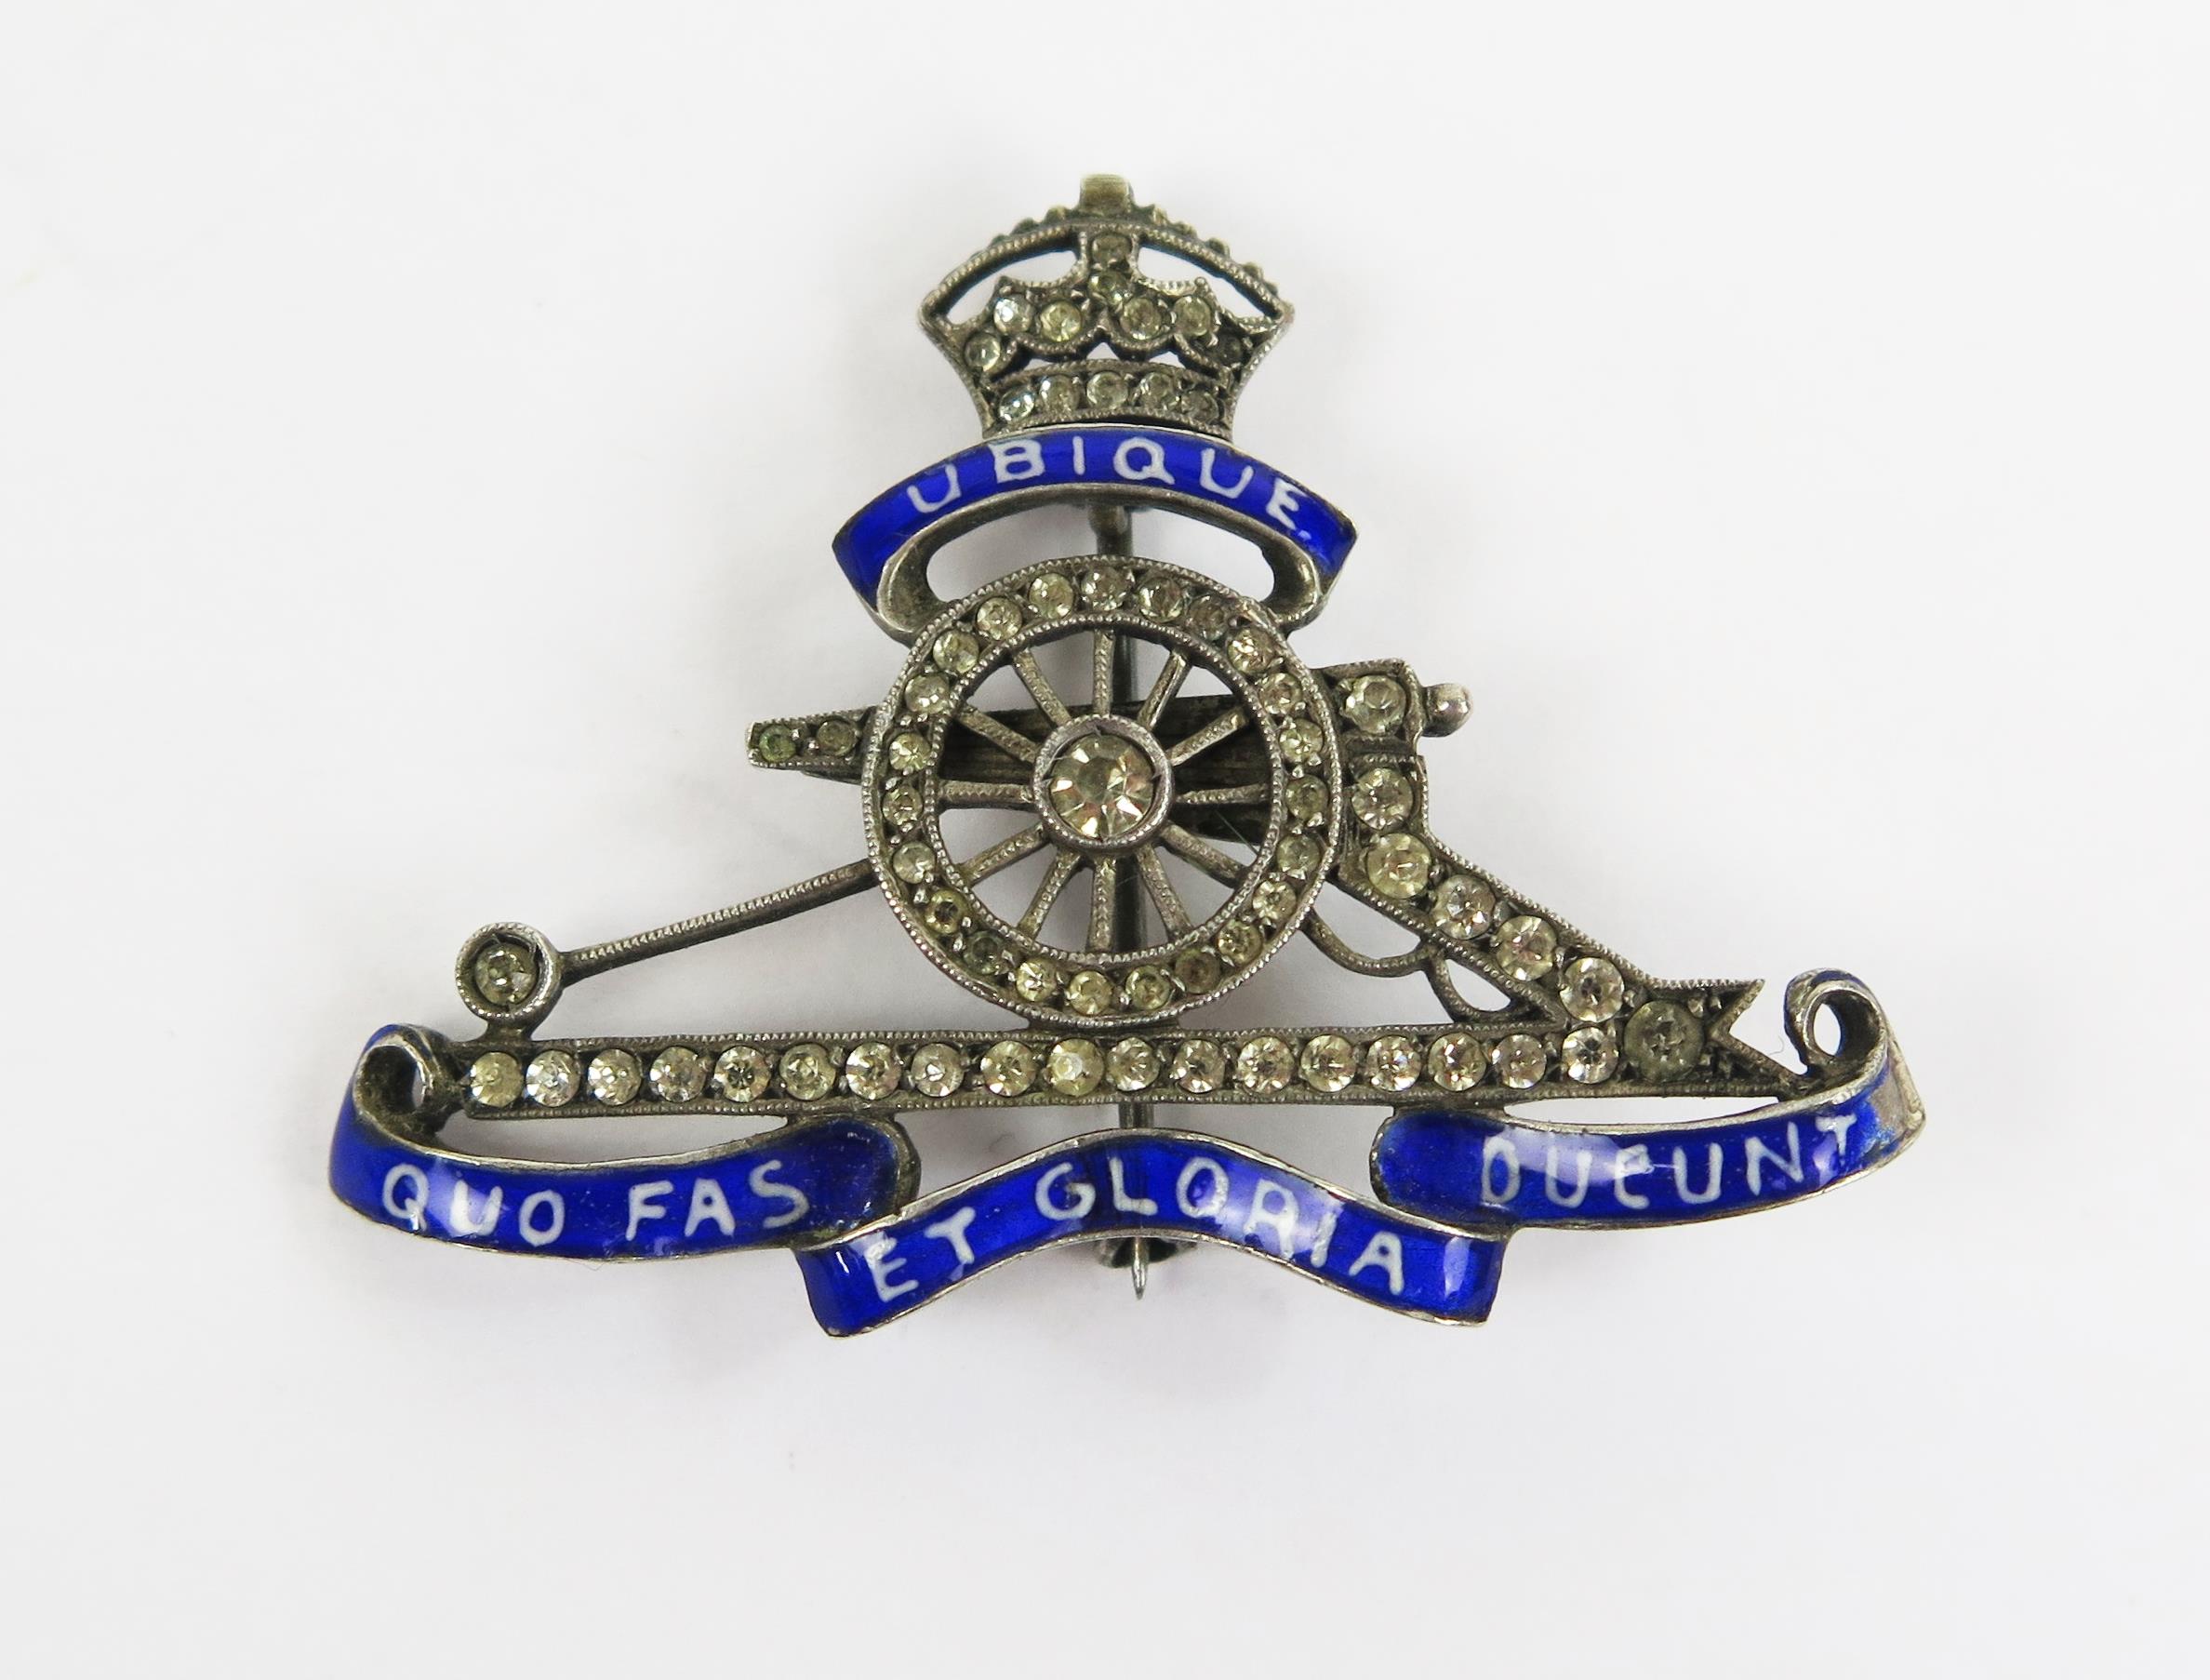 A Royal Engineers Unmarked Silver, Enamel and Paste Brooch bearing the motto Ubique Quo Fas Et